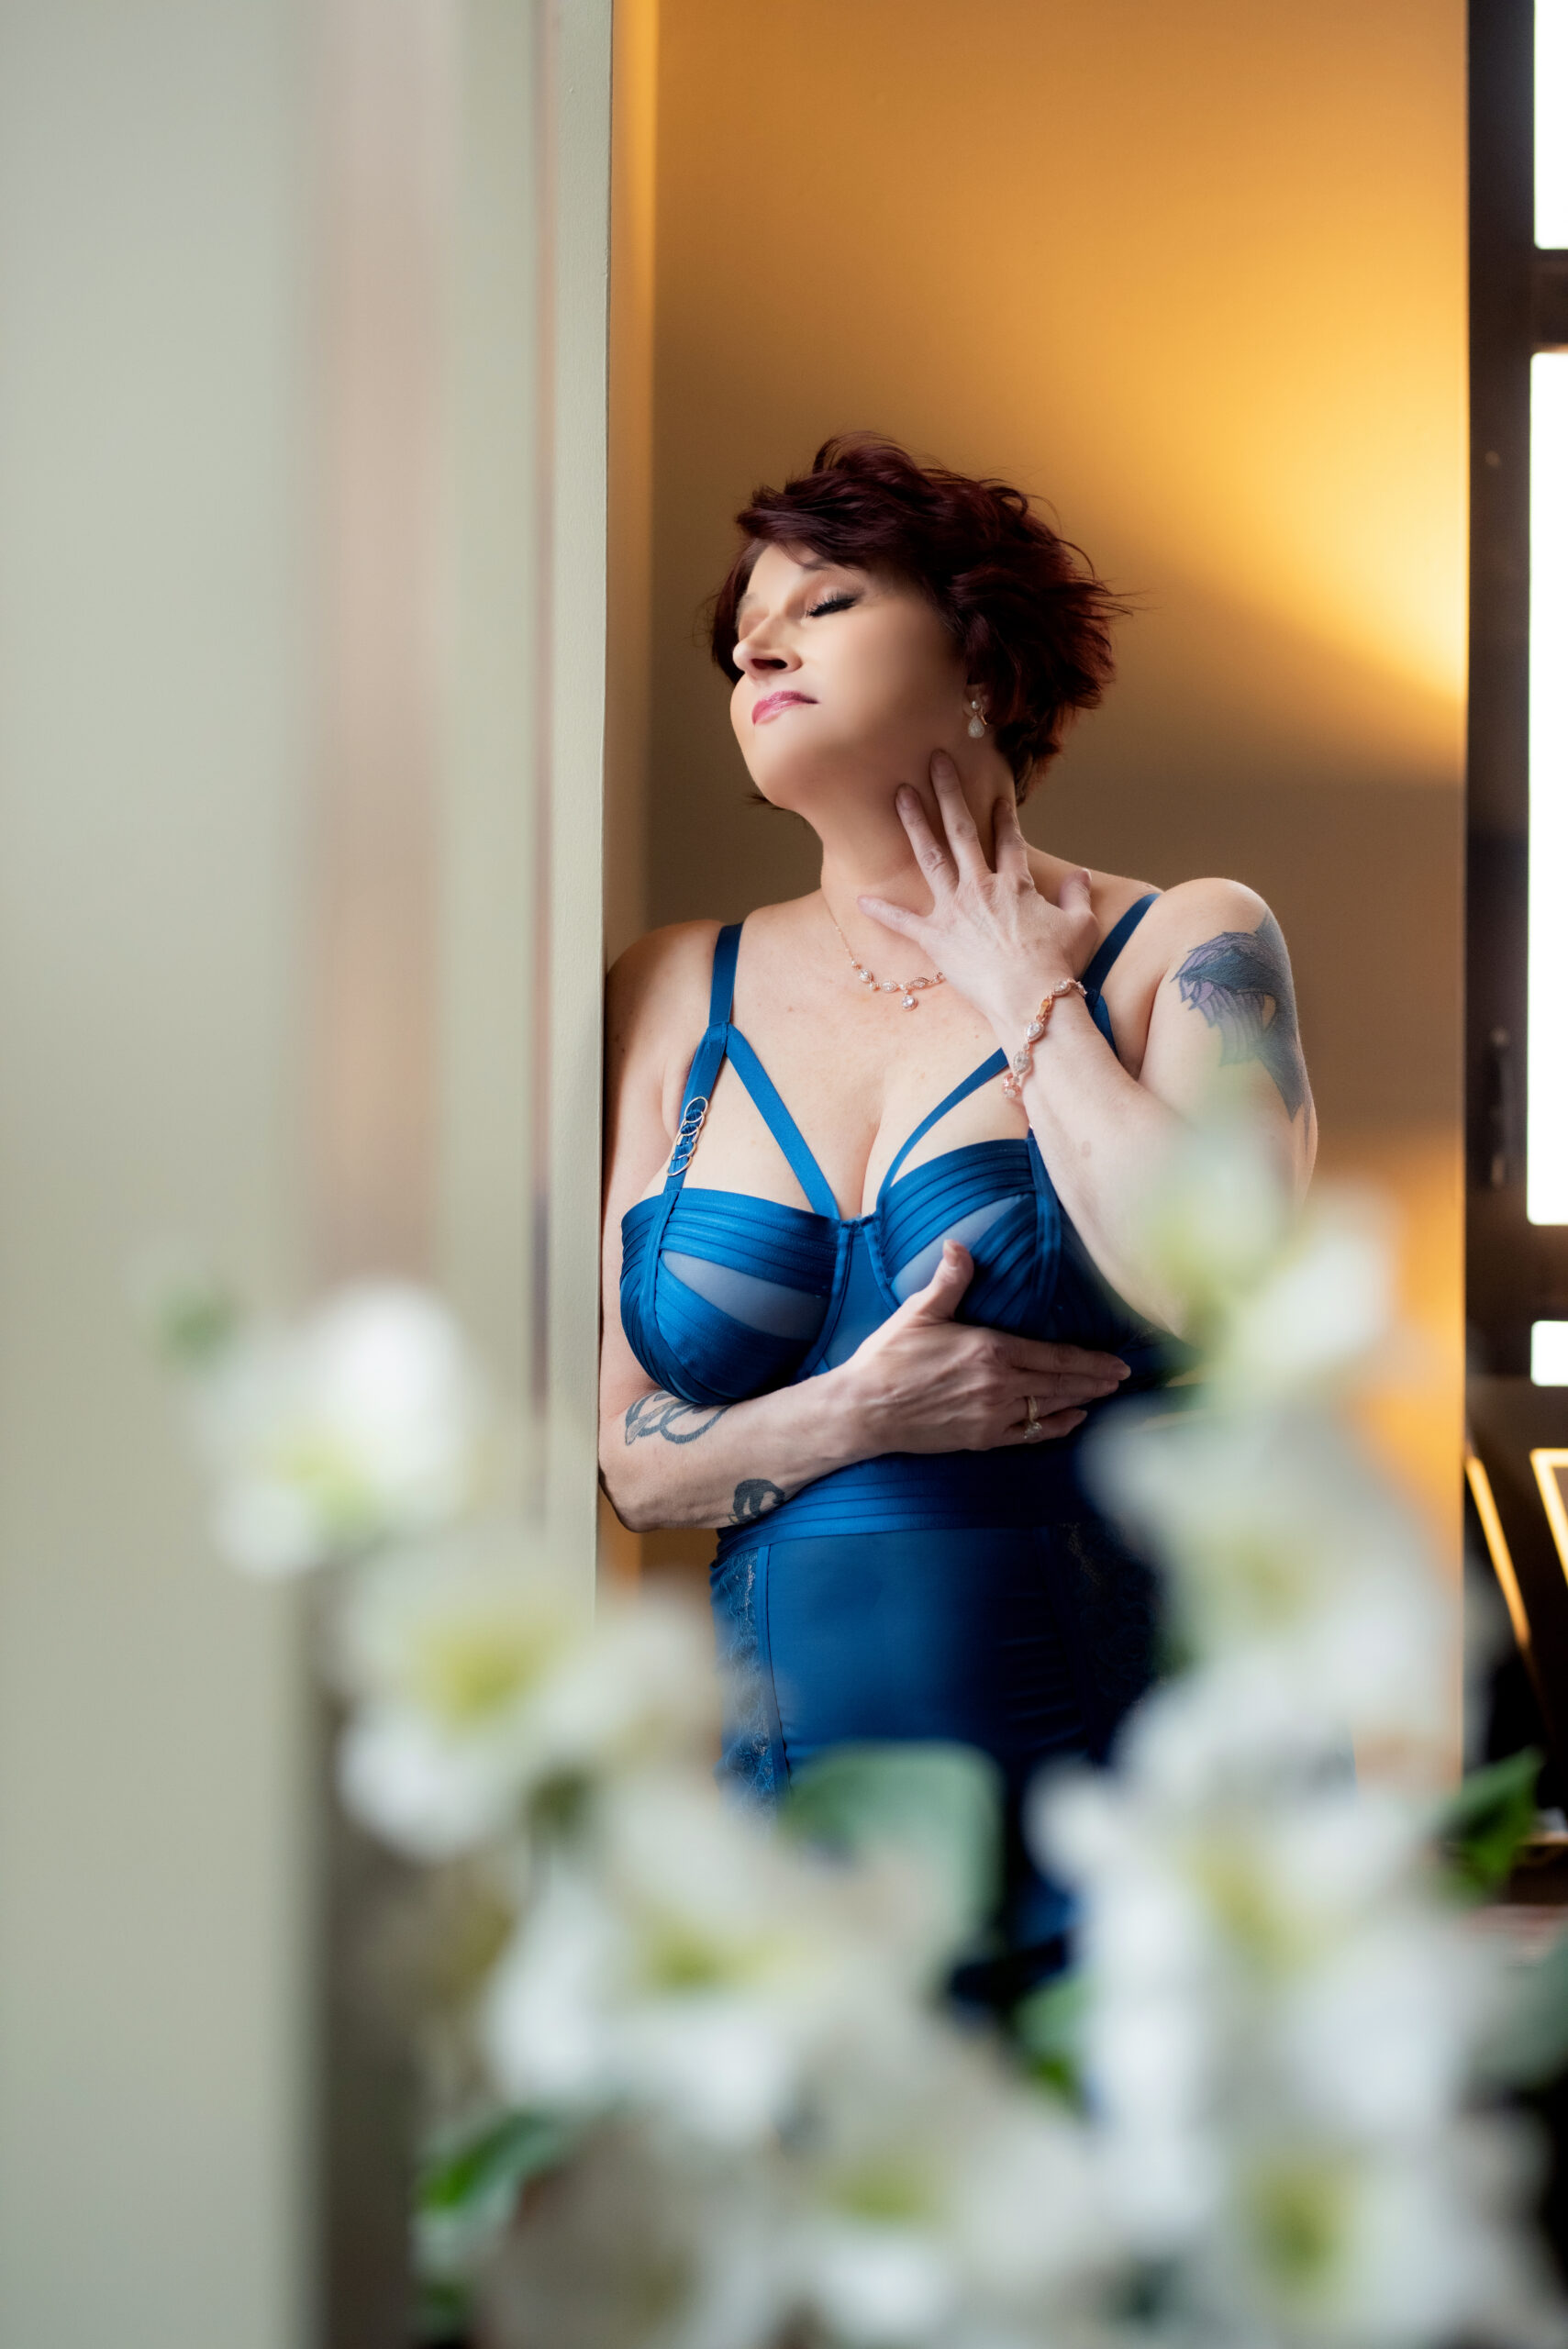 An older woman with short reddish-brown hair poses confidently in a blue lingerie set in the sun room hidden behind the beautiful monstera plant. The setting is the opulent Gatsby penthouse in Midtown, St. Louis, Missouri, owned by Josh Gould of Gould Holdings. The image was captured by Aloha Kelly of Love Exposed Boudoir.